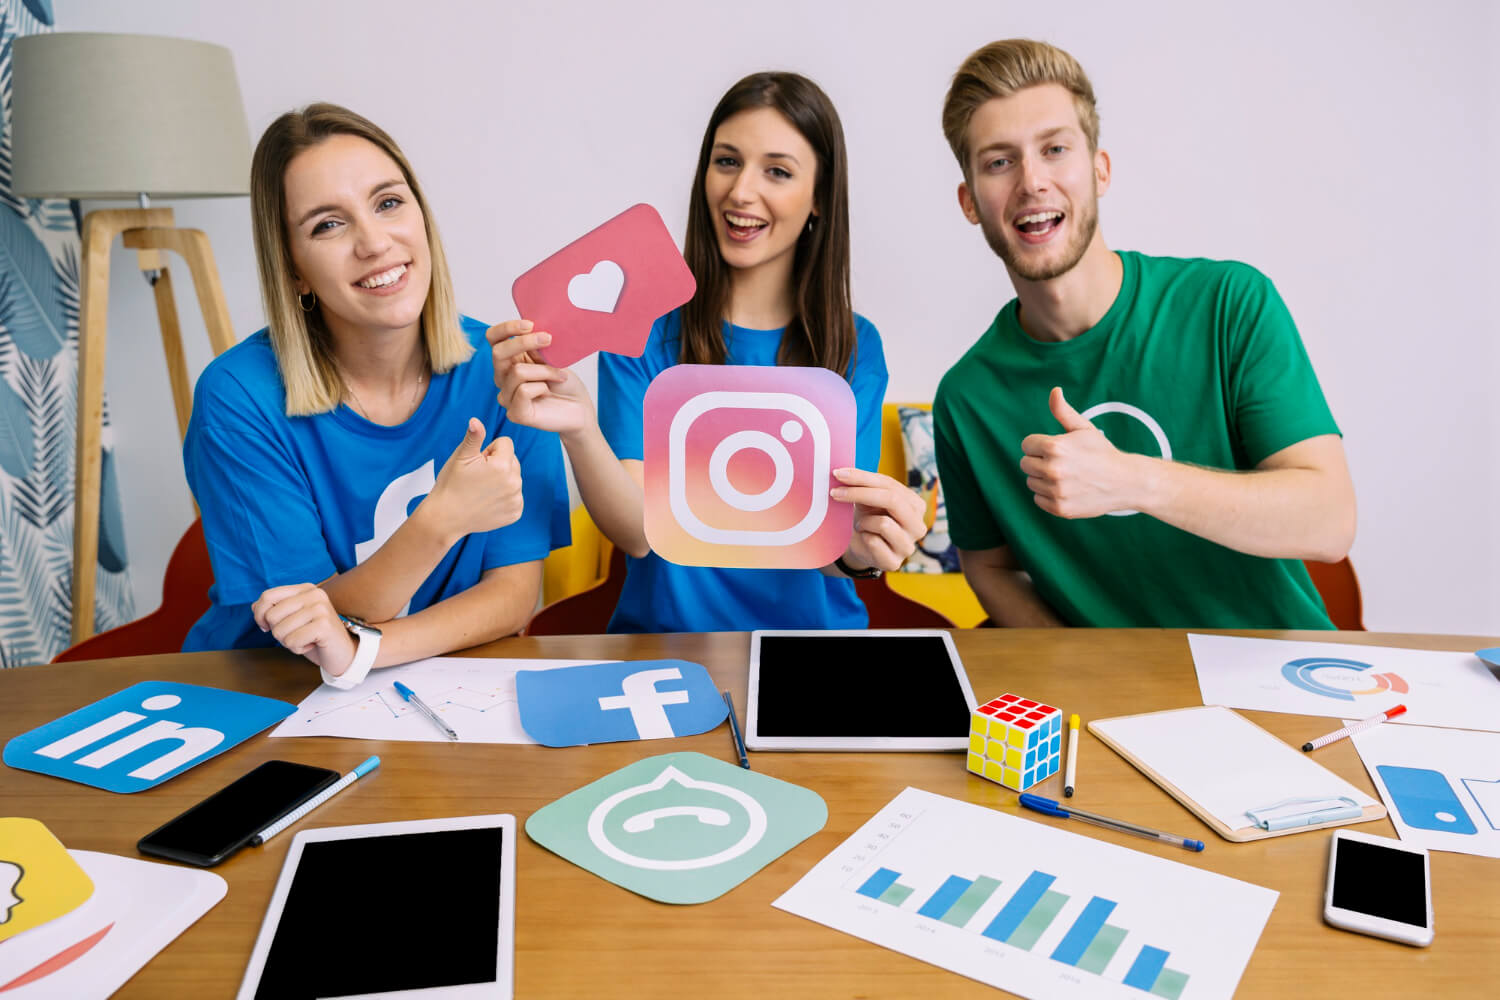 8 Dynamic Instagram Marketing Techniques to Boost Your Business